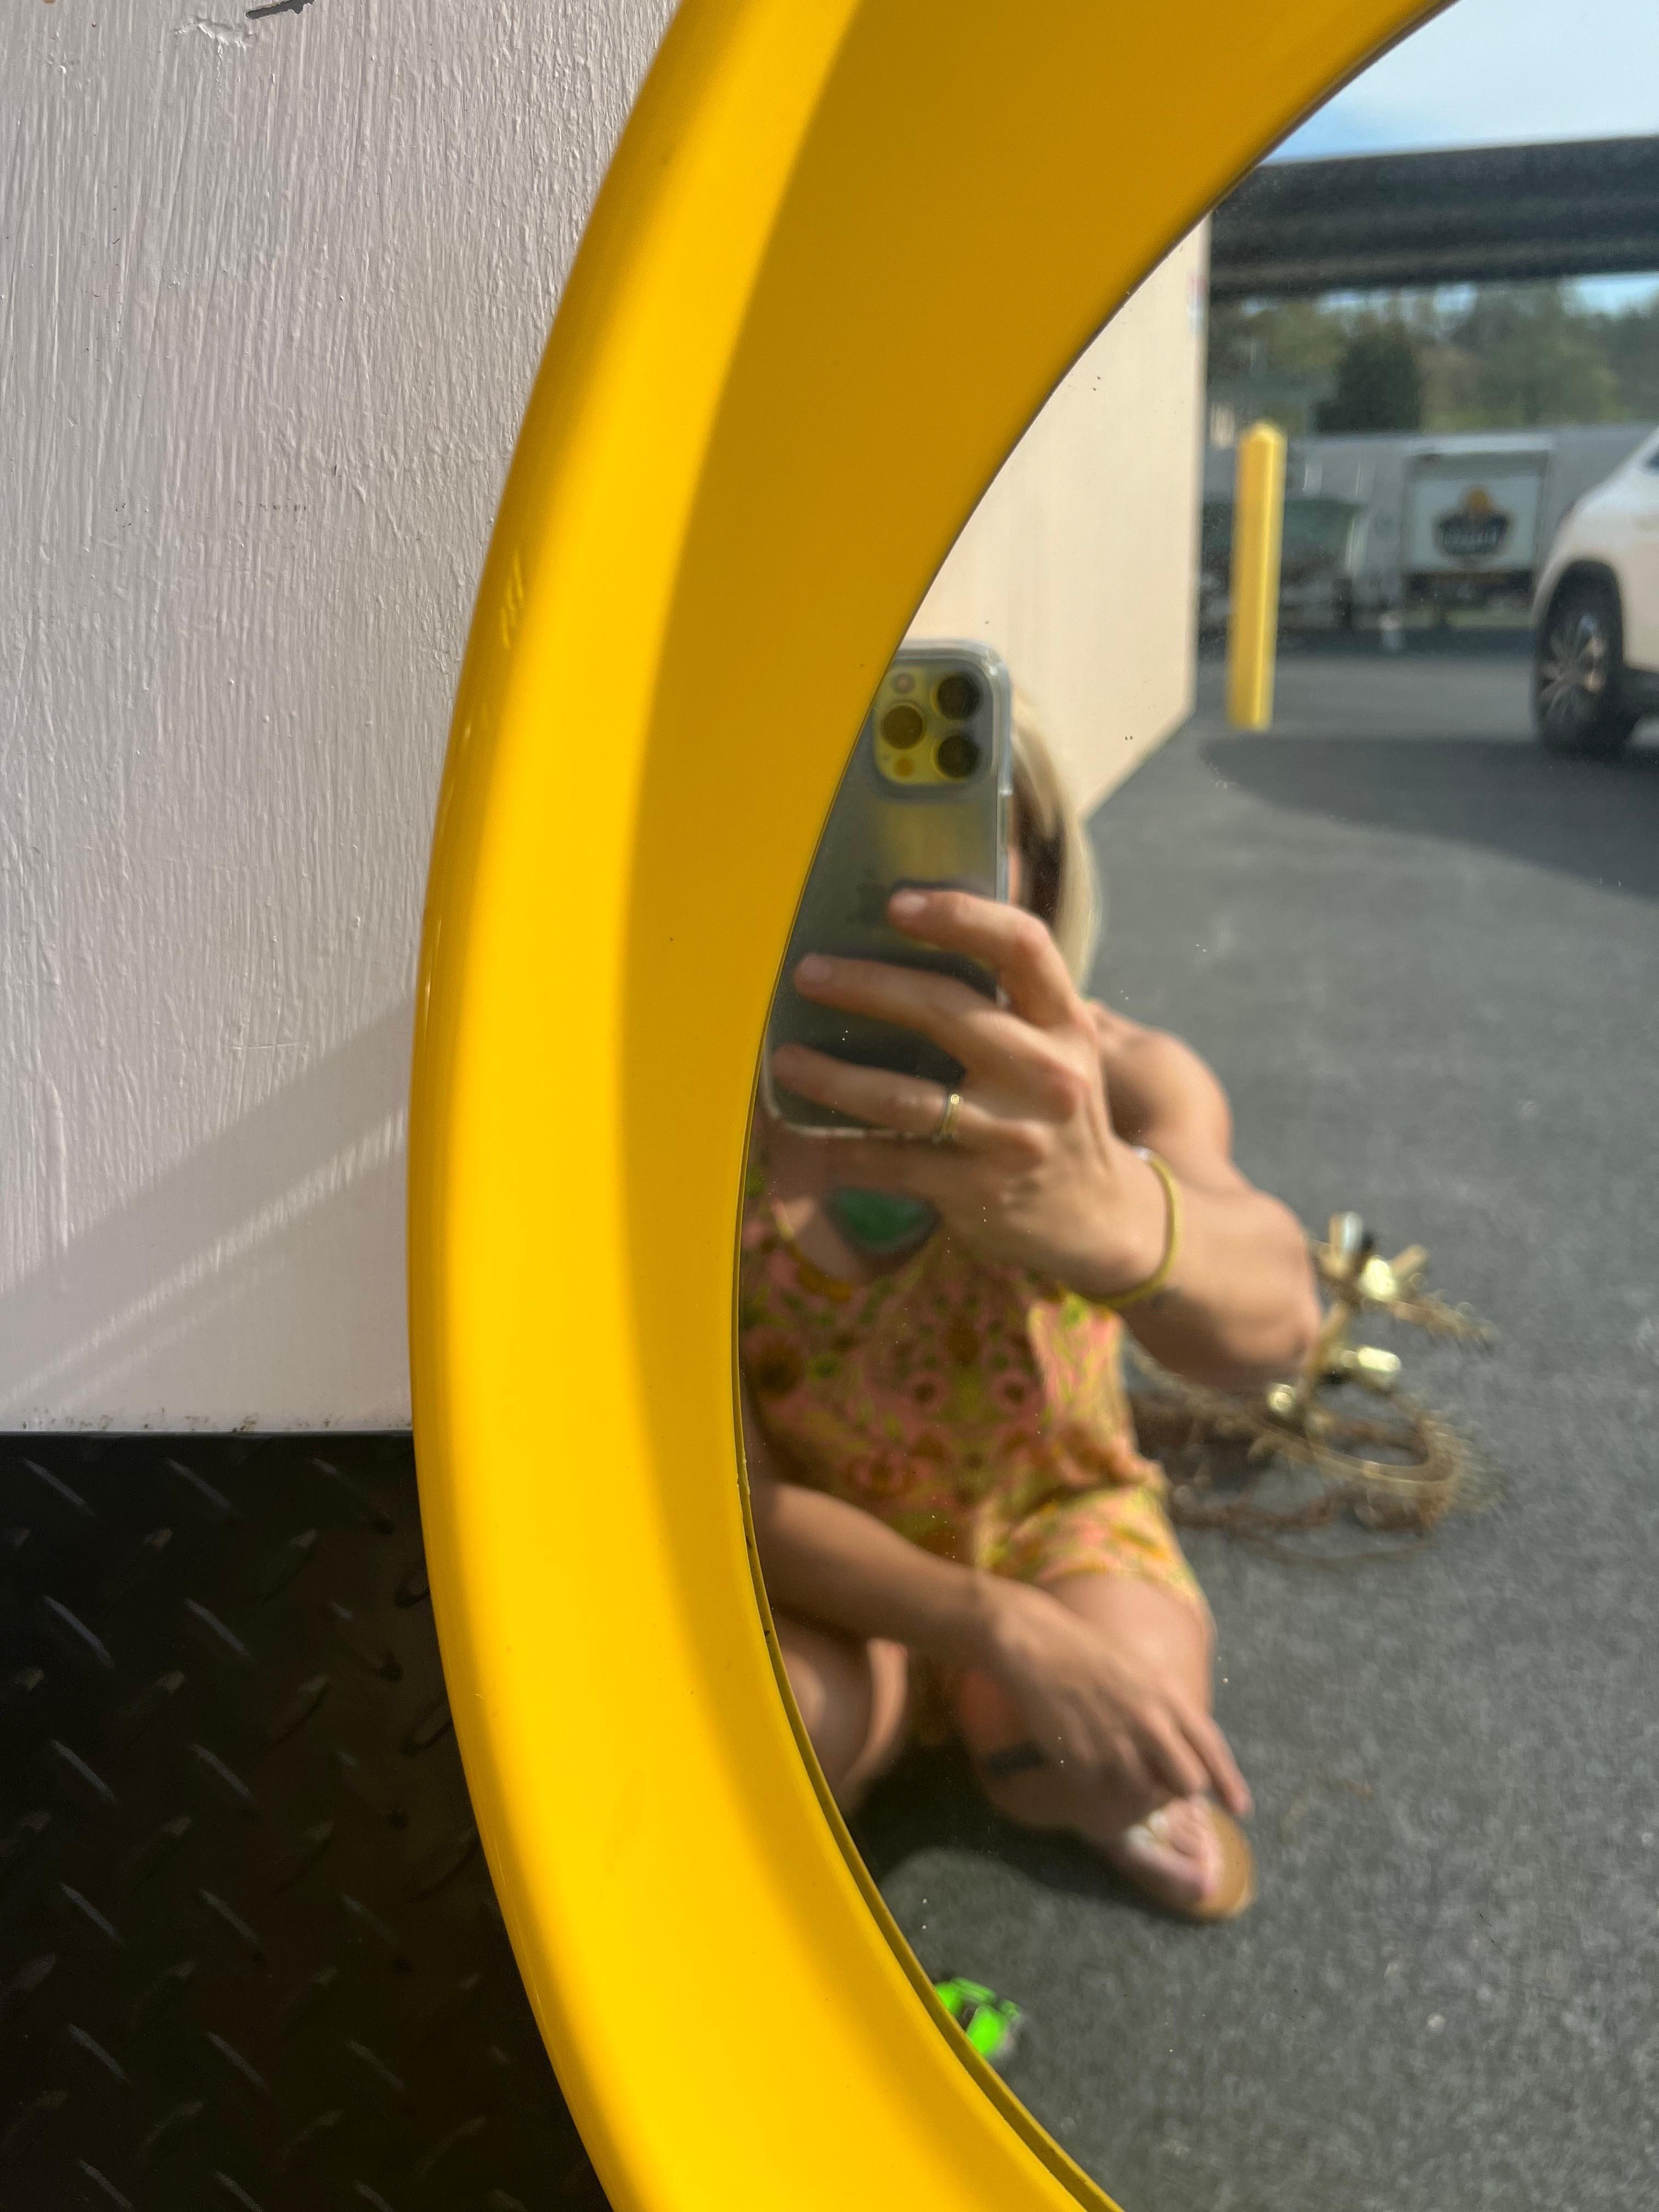 Oooh lawd I am loving this mirror!   There is nothing like a good pop of yellow to brighten a room!   This 1970’s plastic mirror has all the right curves in all the right places.  It is currently set up to hang vertically but can but hung horizontal